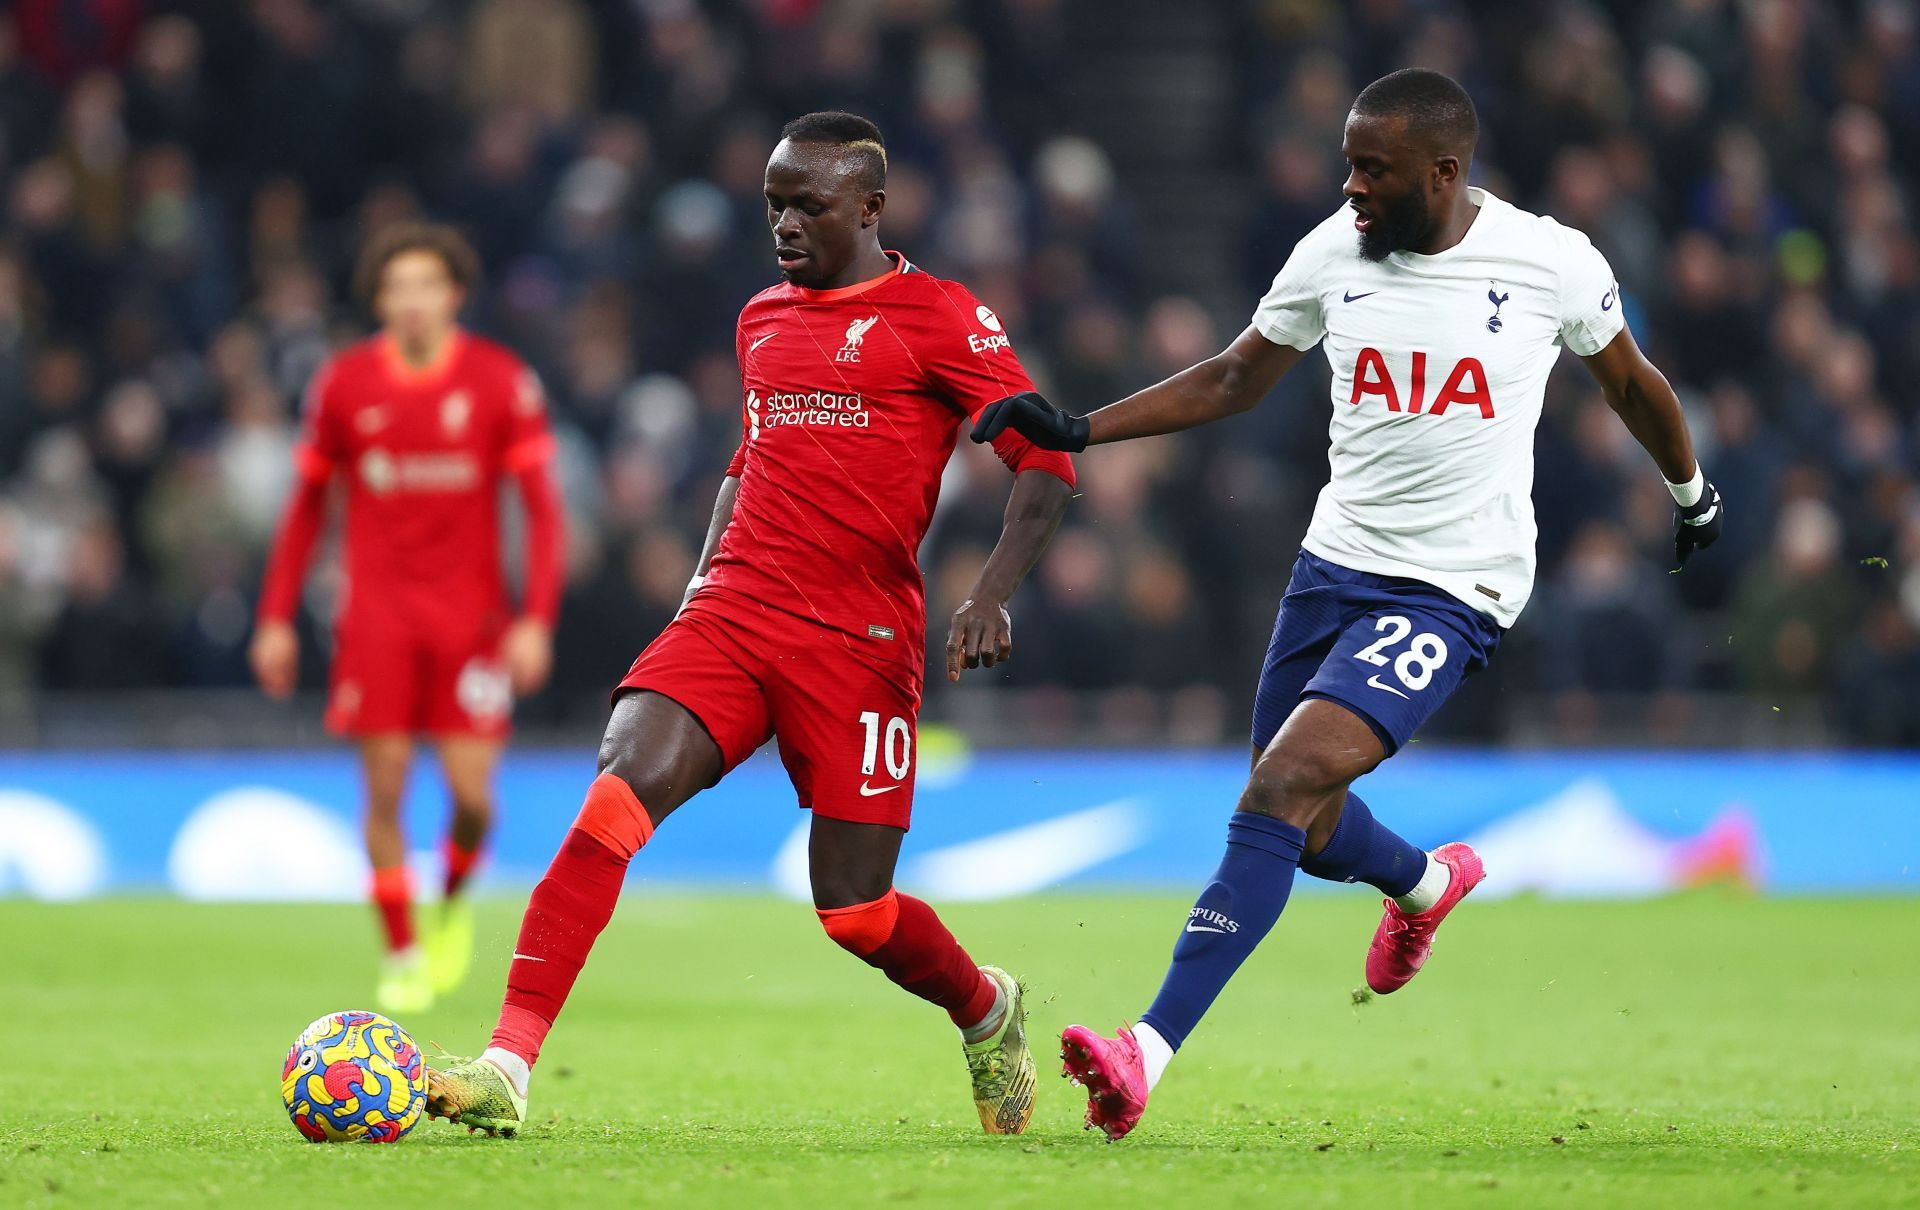 Sadio Mane in action for the Reds